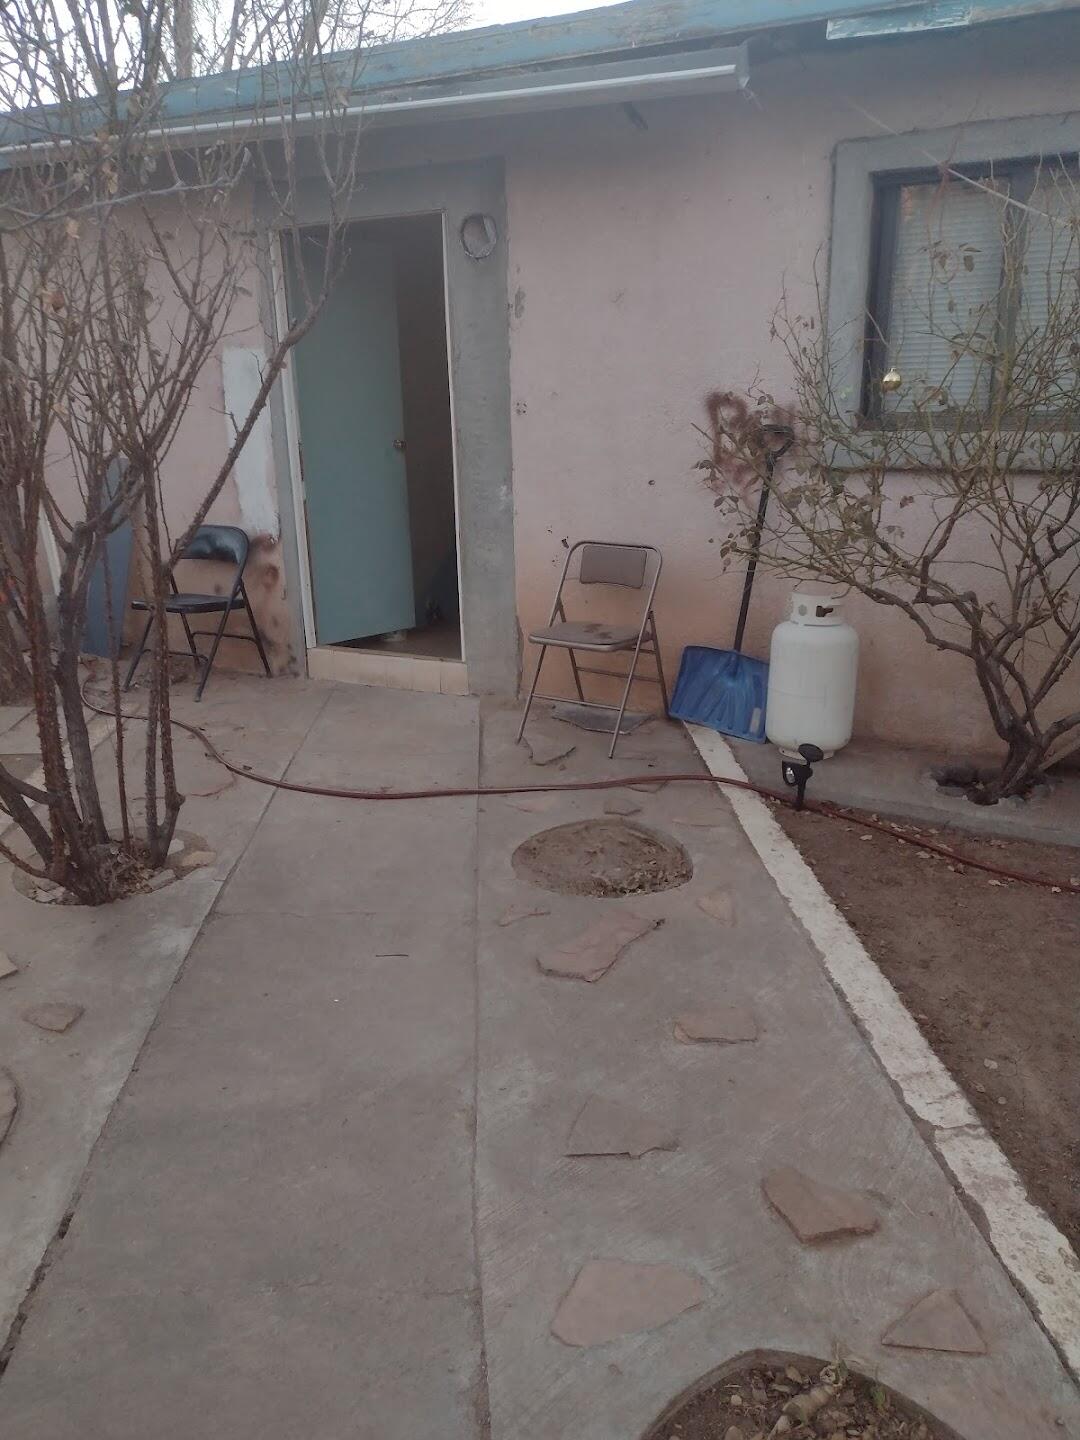 Great opportunity to live in the country in the heart of Bernalillo.  2 car detached garage with a casita.  2 bedrooms with 1 bath. Cute and cozy.  Now for the house you have 3 bedrooms 2 baths.  Lots of lisving space.  Priced to sell and in as is condition.  On permanent foundation.